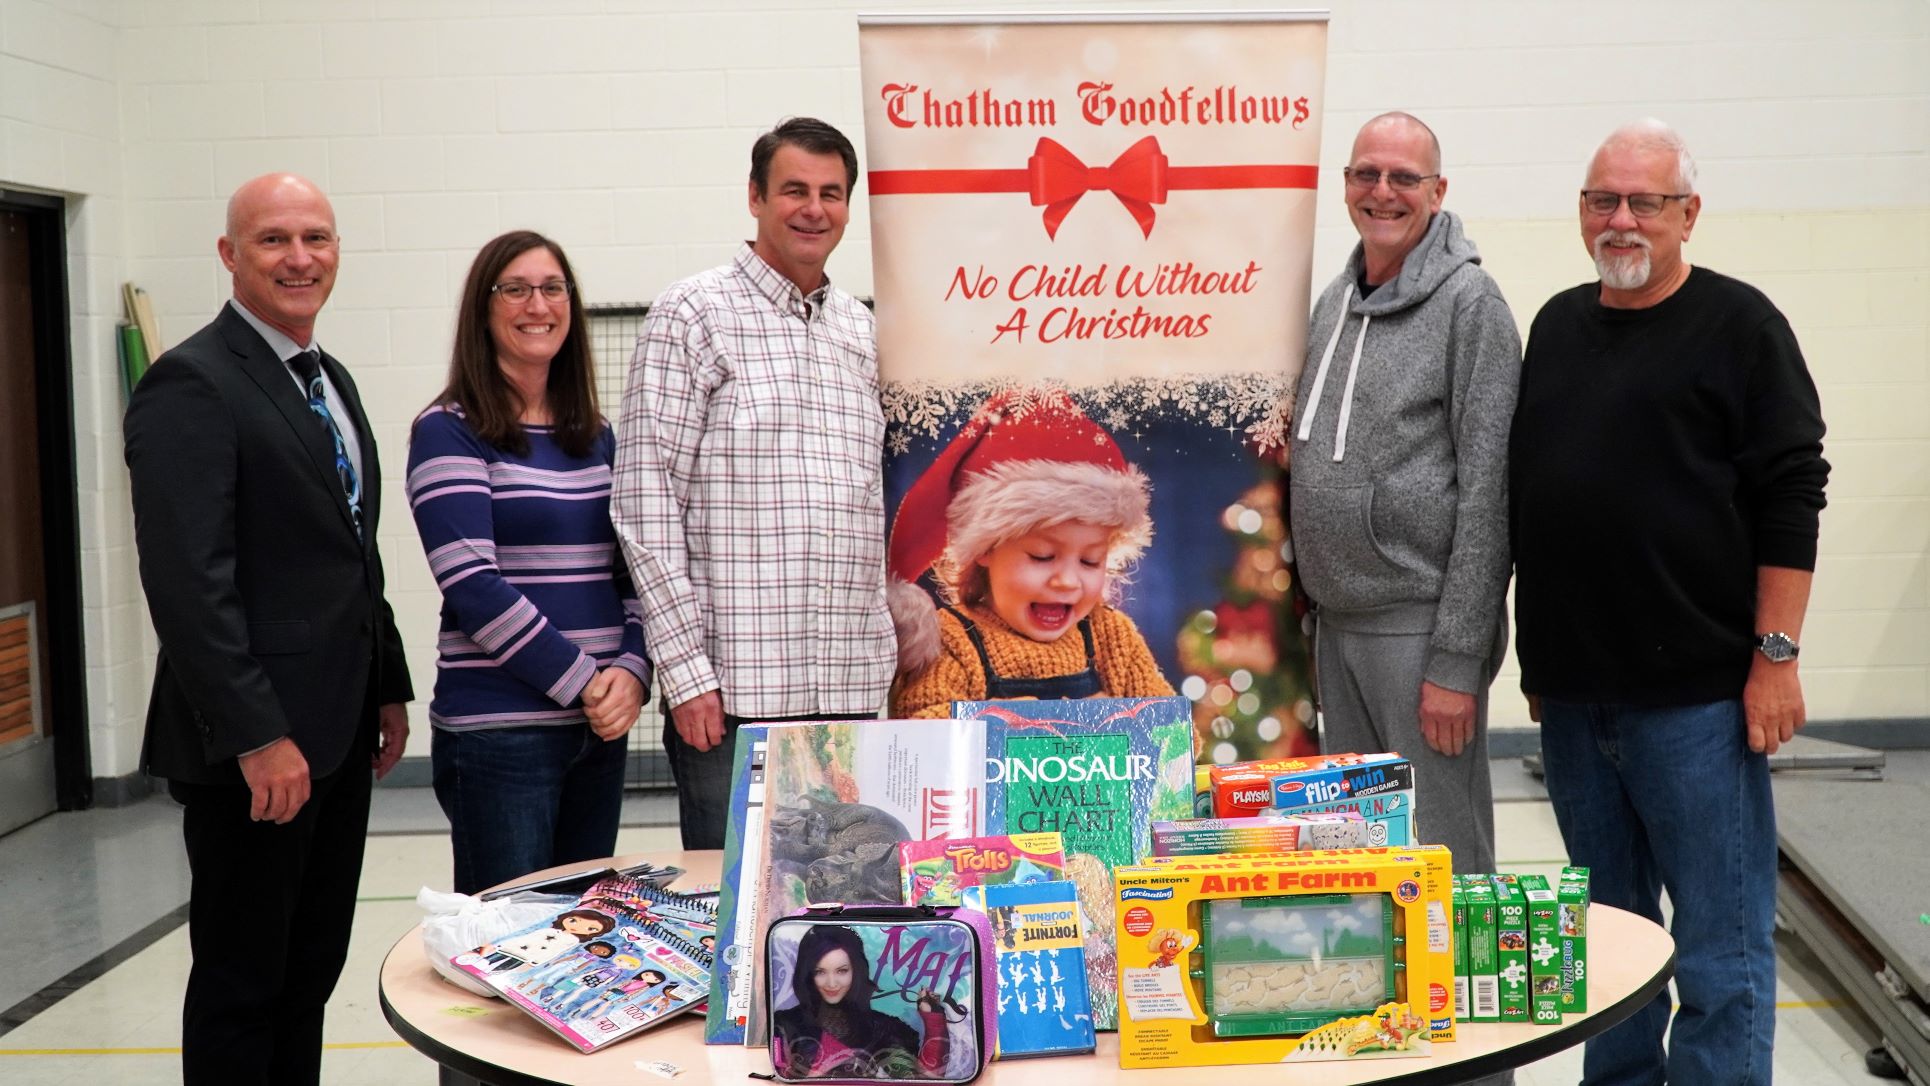 St. Clair Catholic Partners with Chatham Goodfellows to Provide ‘Toy Barn’ for 2022 Christmas Campaign